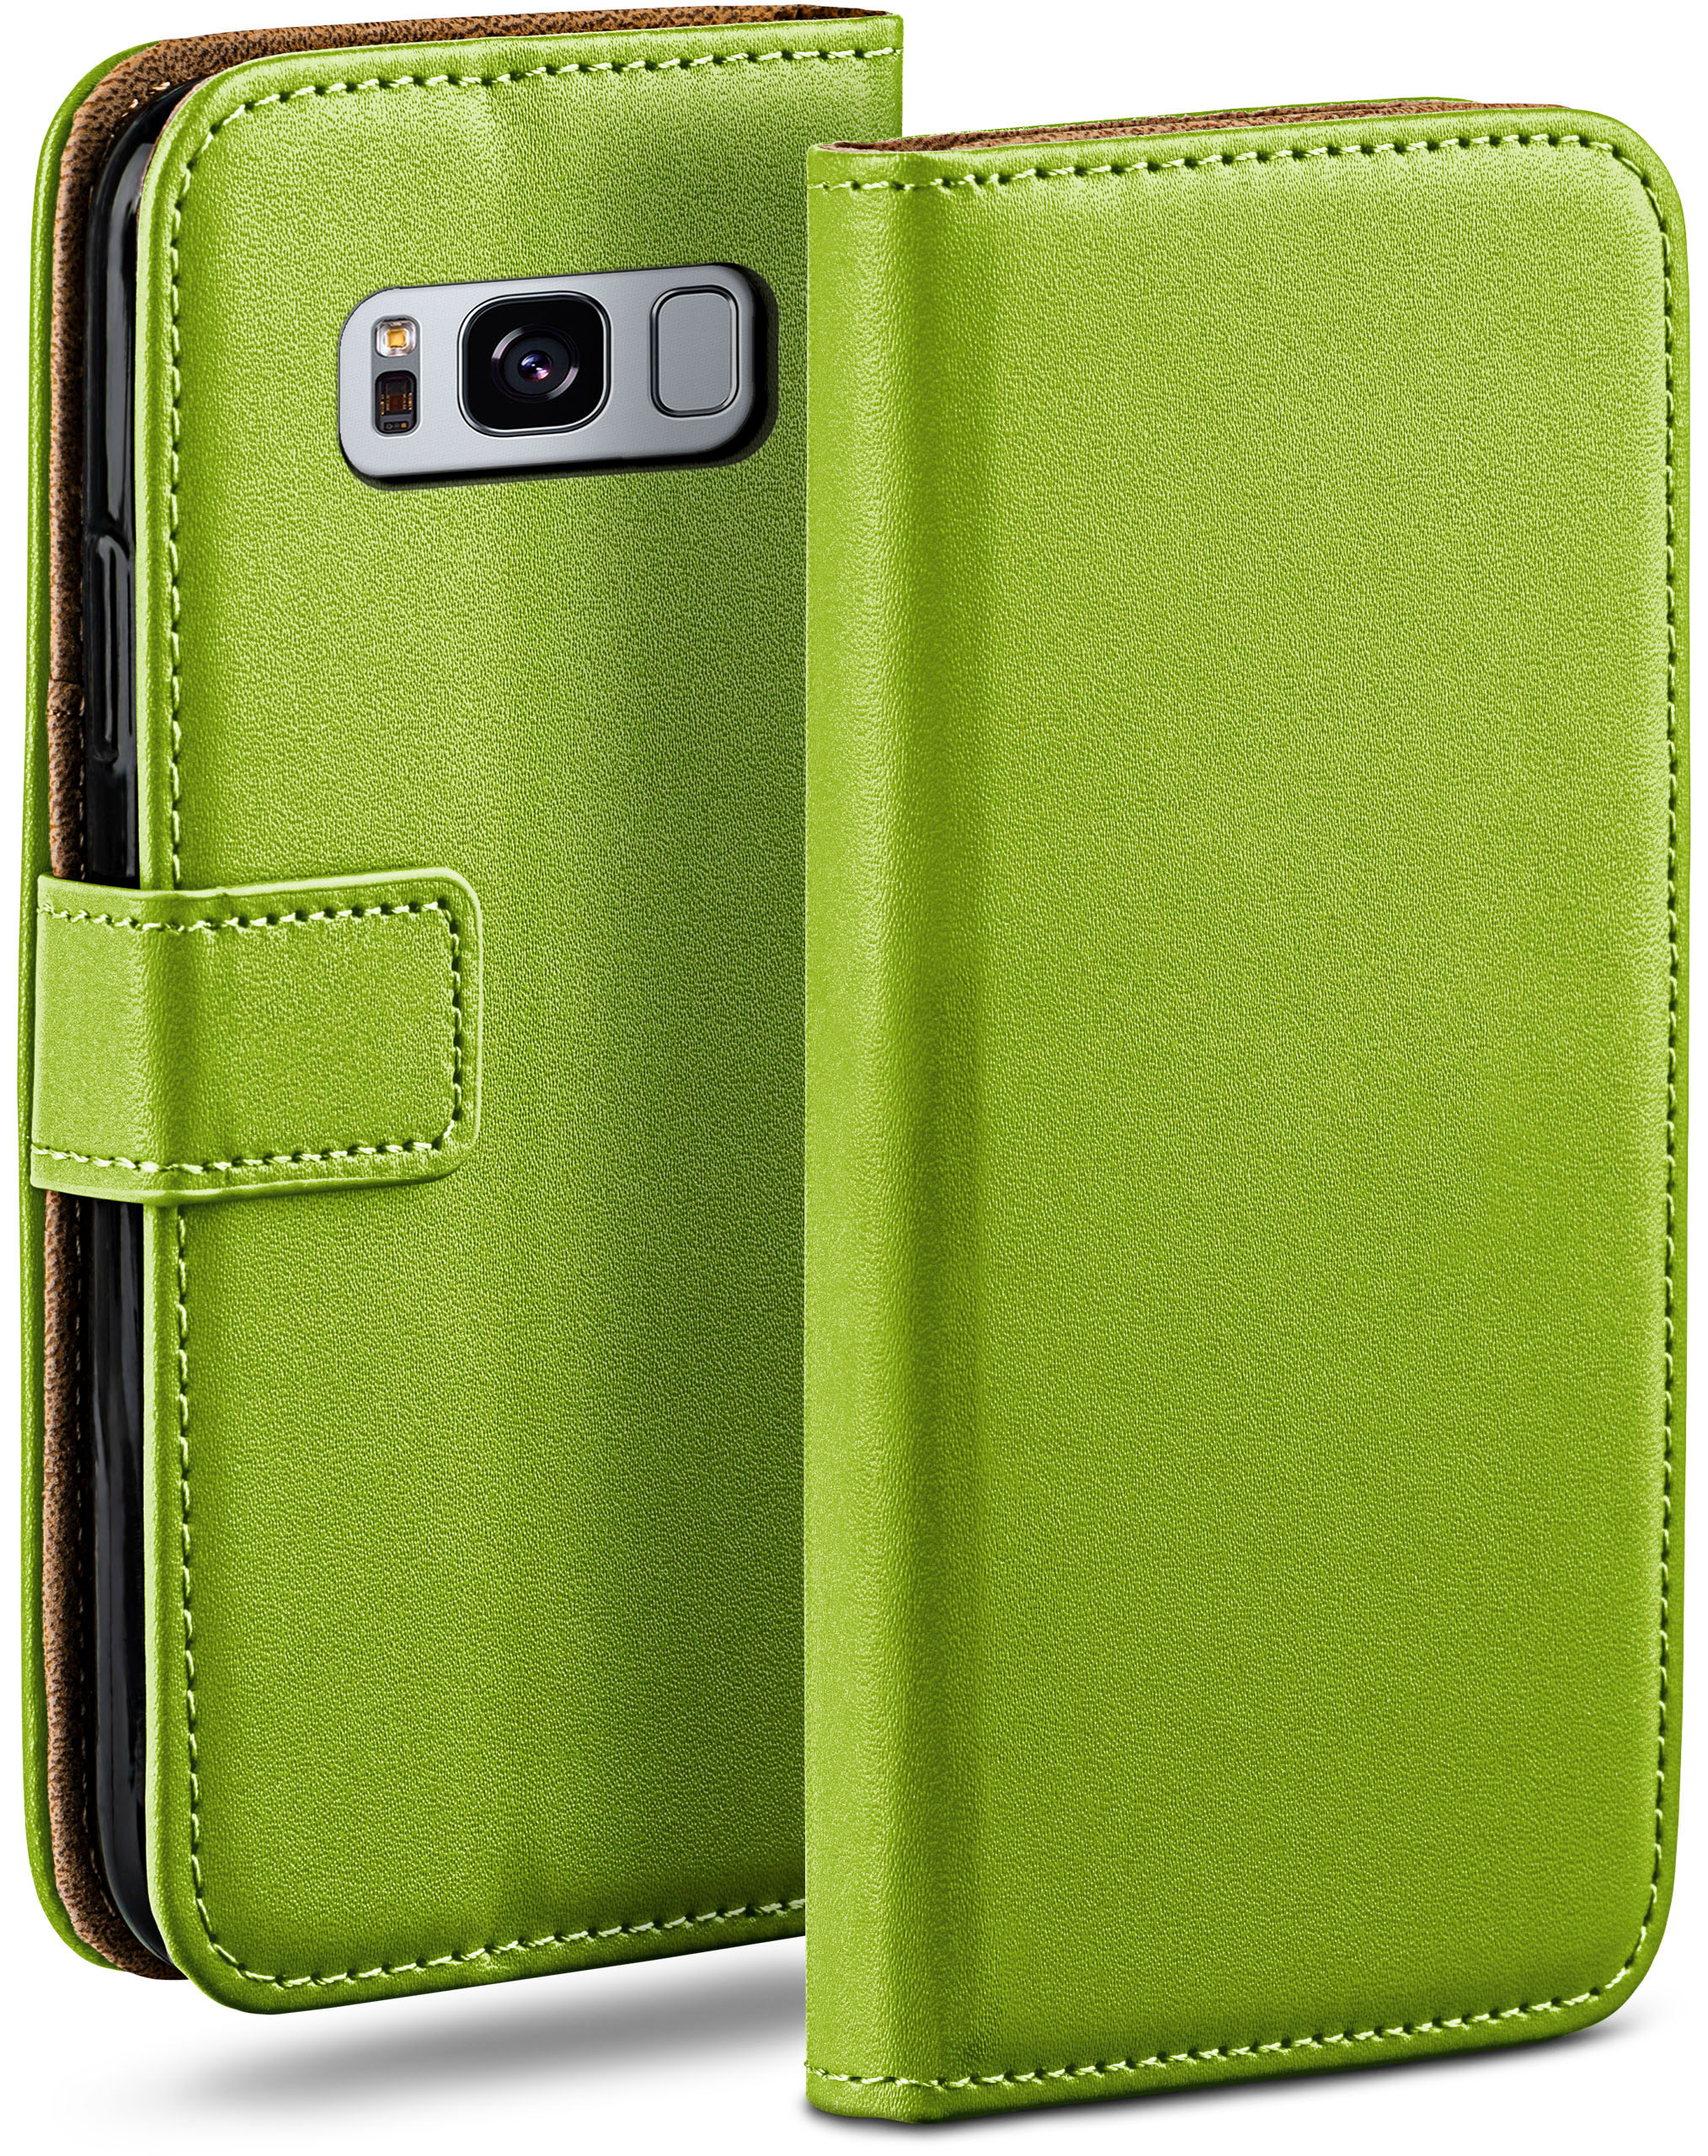 MOEX Book Samsung, Lime-Green S8 Case, Galaxy Plus, Bookcover